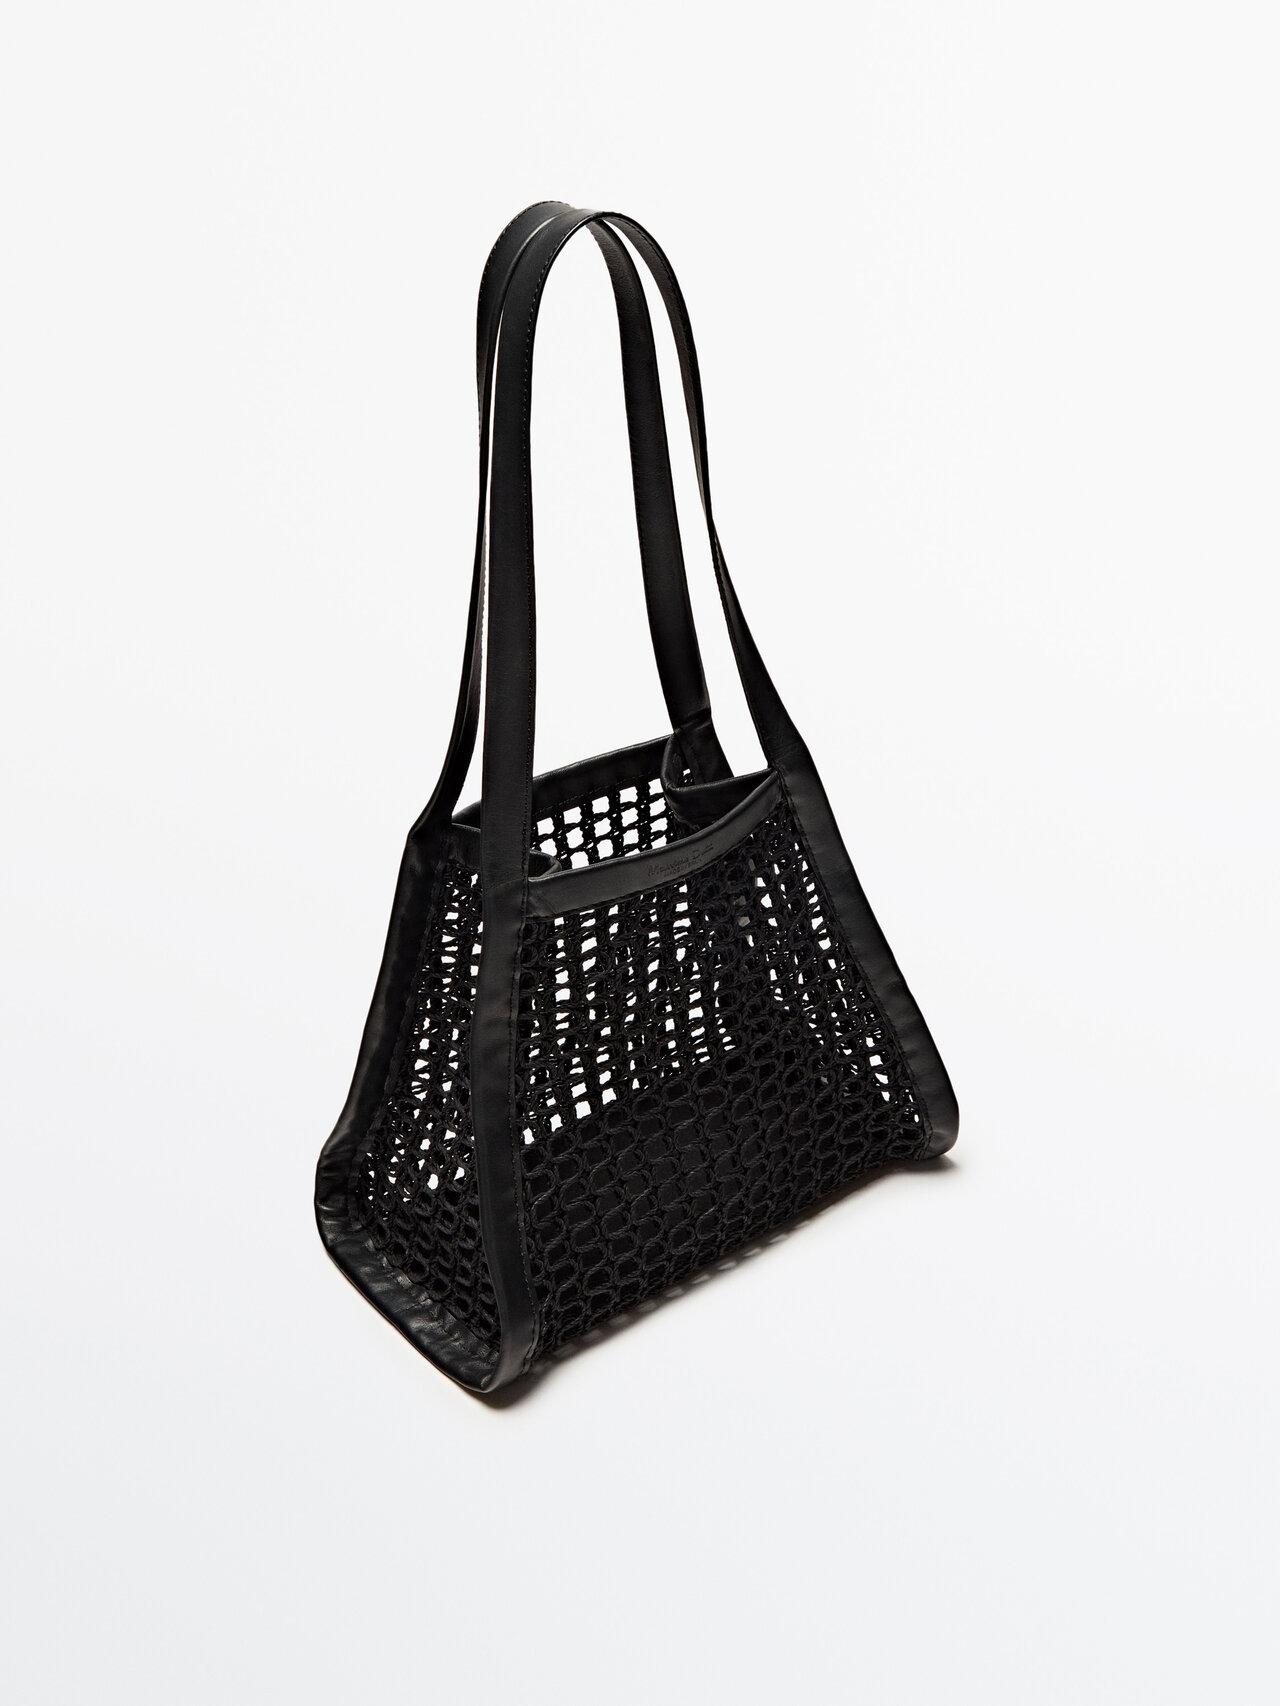 MASSIMO DUTTI Contrast Leather Mesh Bag - Limited Edition in Black | Lyst